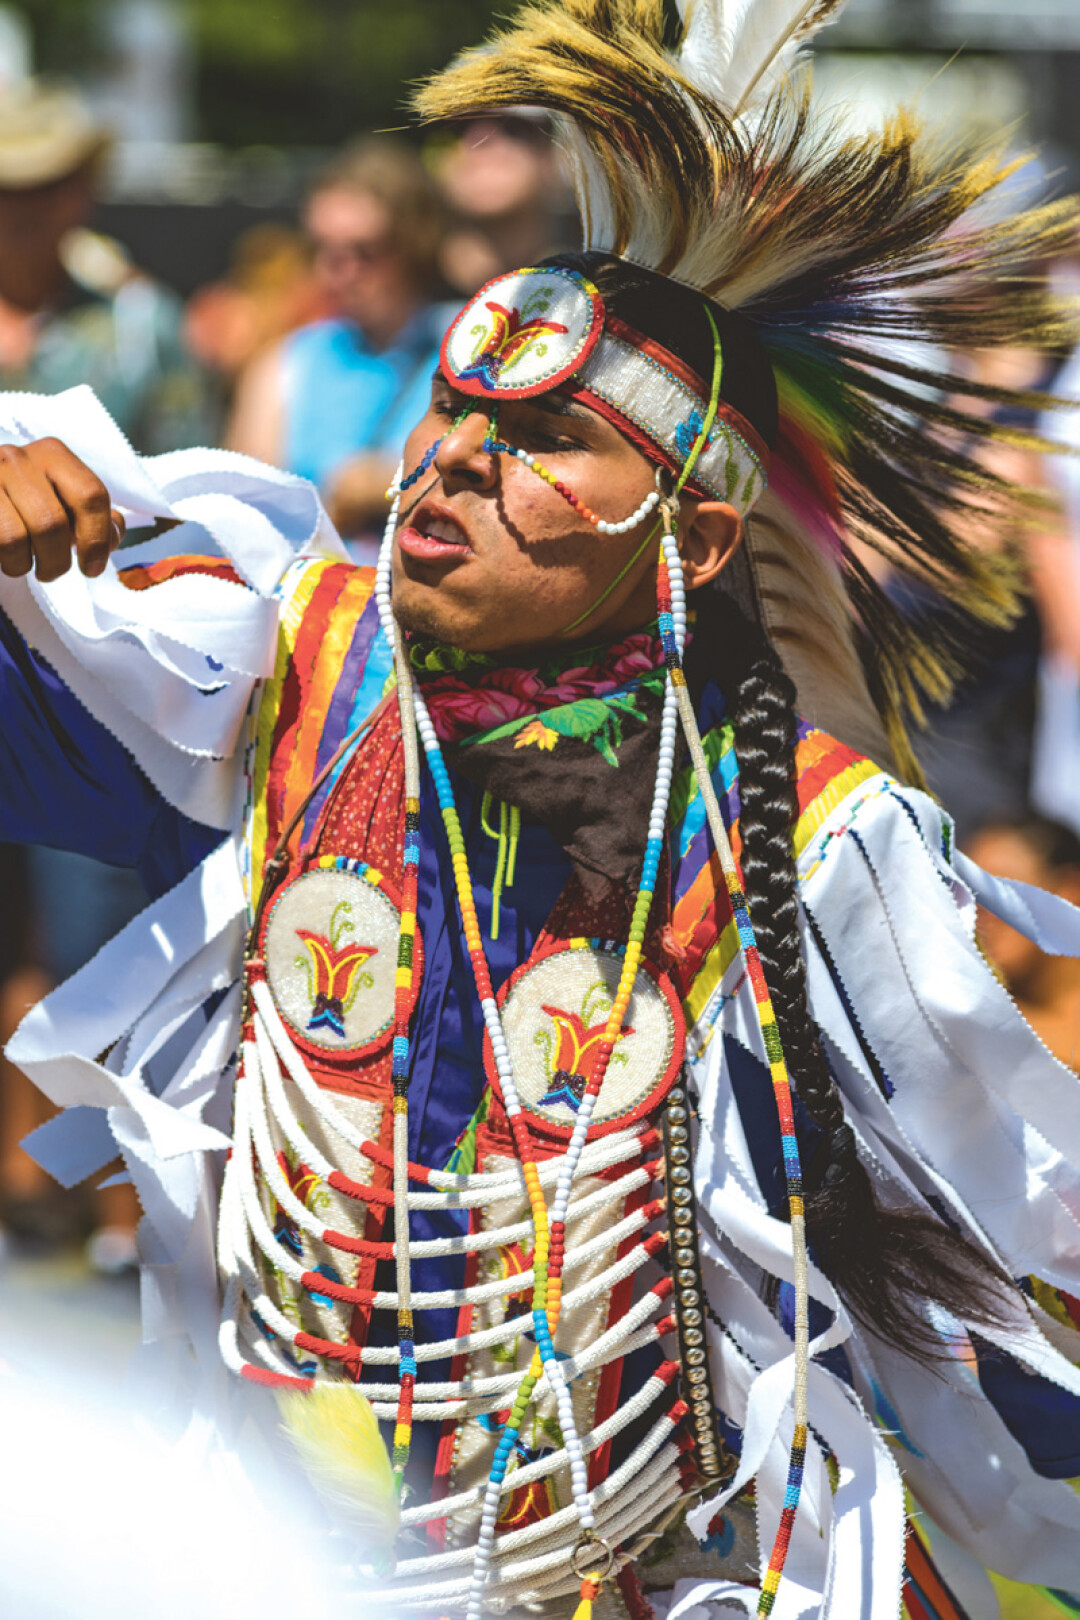 ECLECTIC FEST. Among the many performances to be seen at the Eaux Claires Music & Arts Festival (Aug. 12-13) were several pop-up shows by the Midnite Express singers of Keshena, Wis., who were accompanied by traditional Native American dancers.